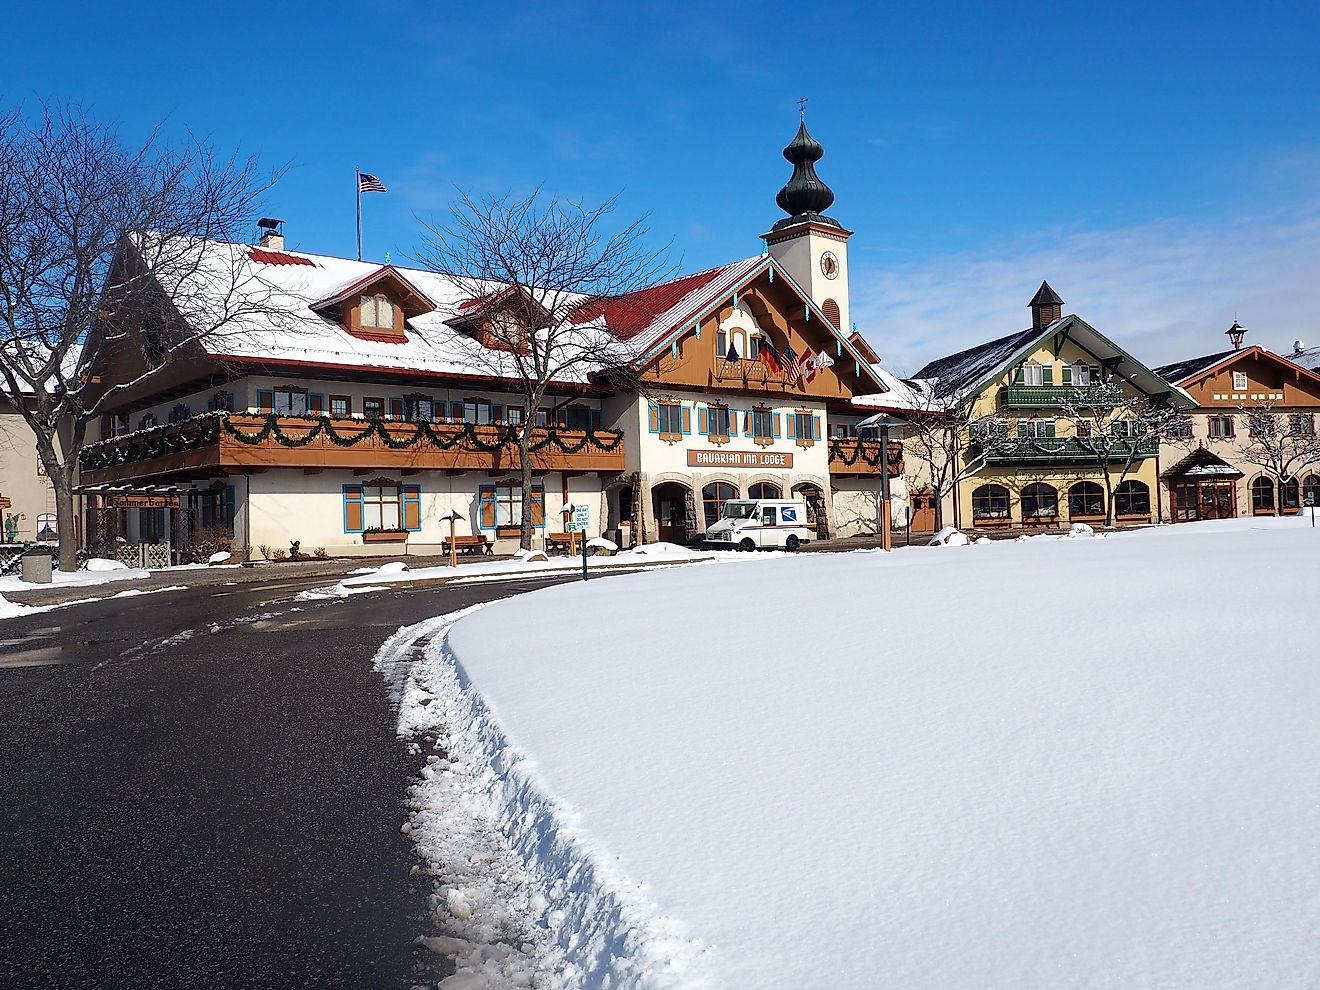 Street view in Frankenmuth, Michigan, during winter, VIA T-I / Shutterstock.com